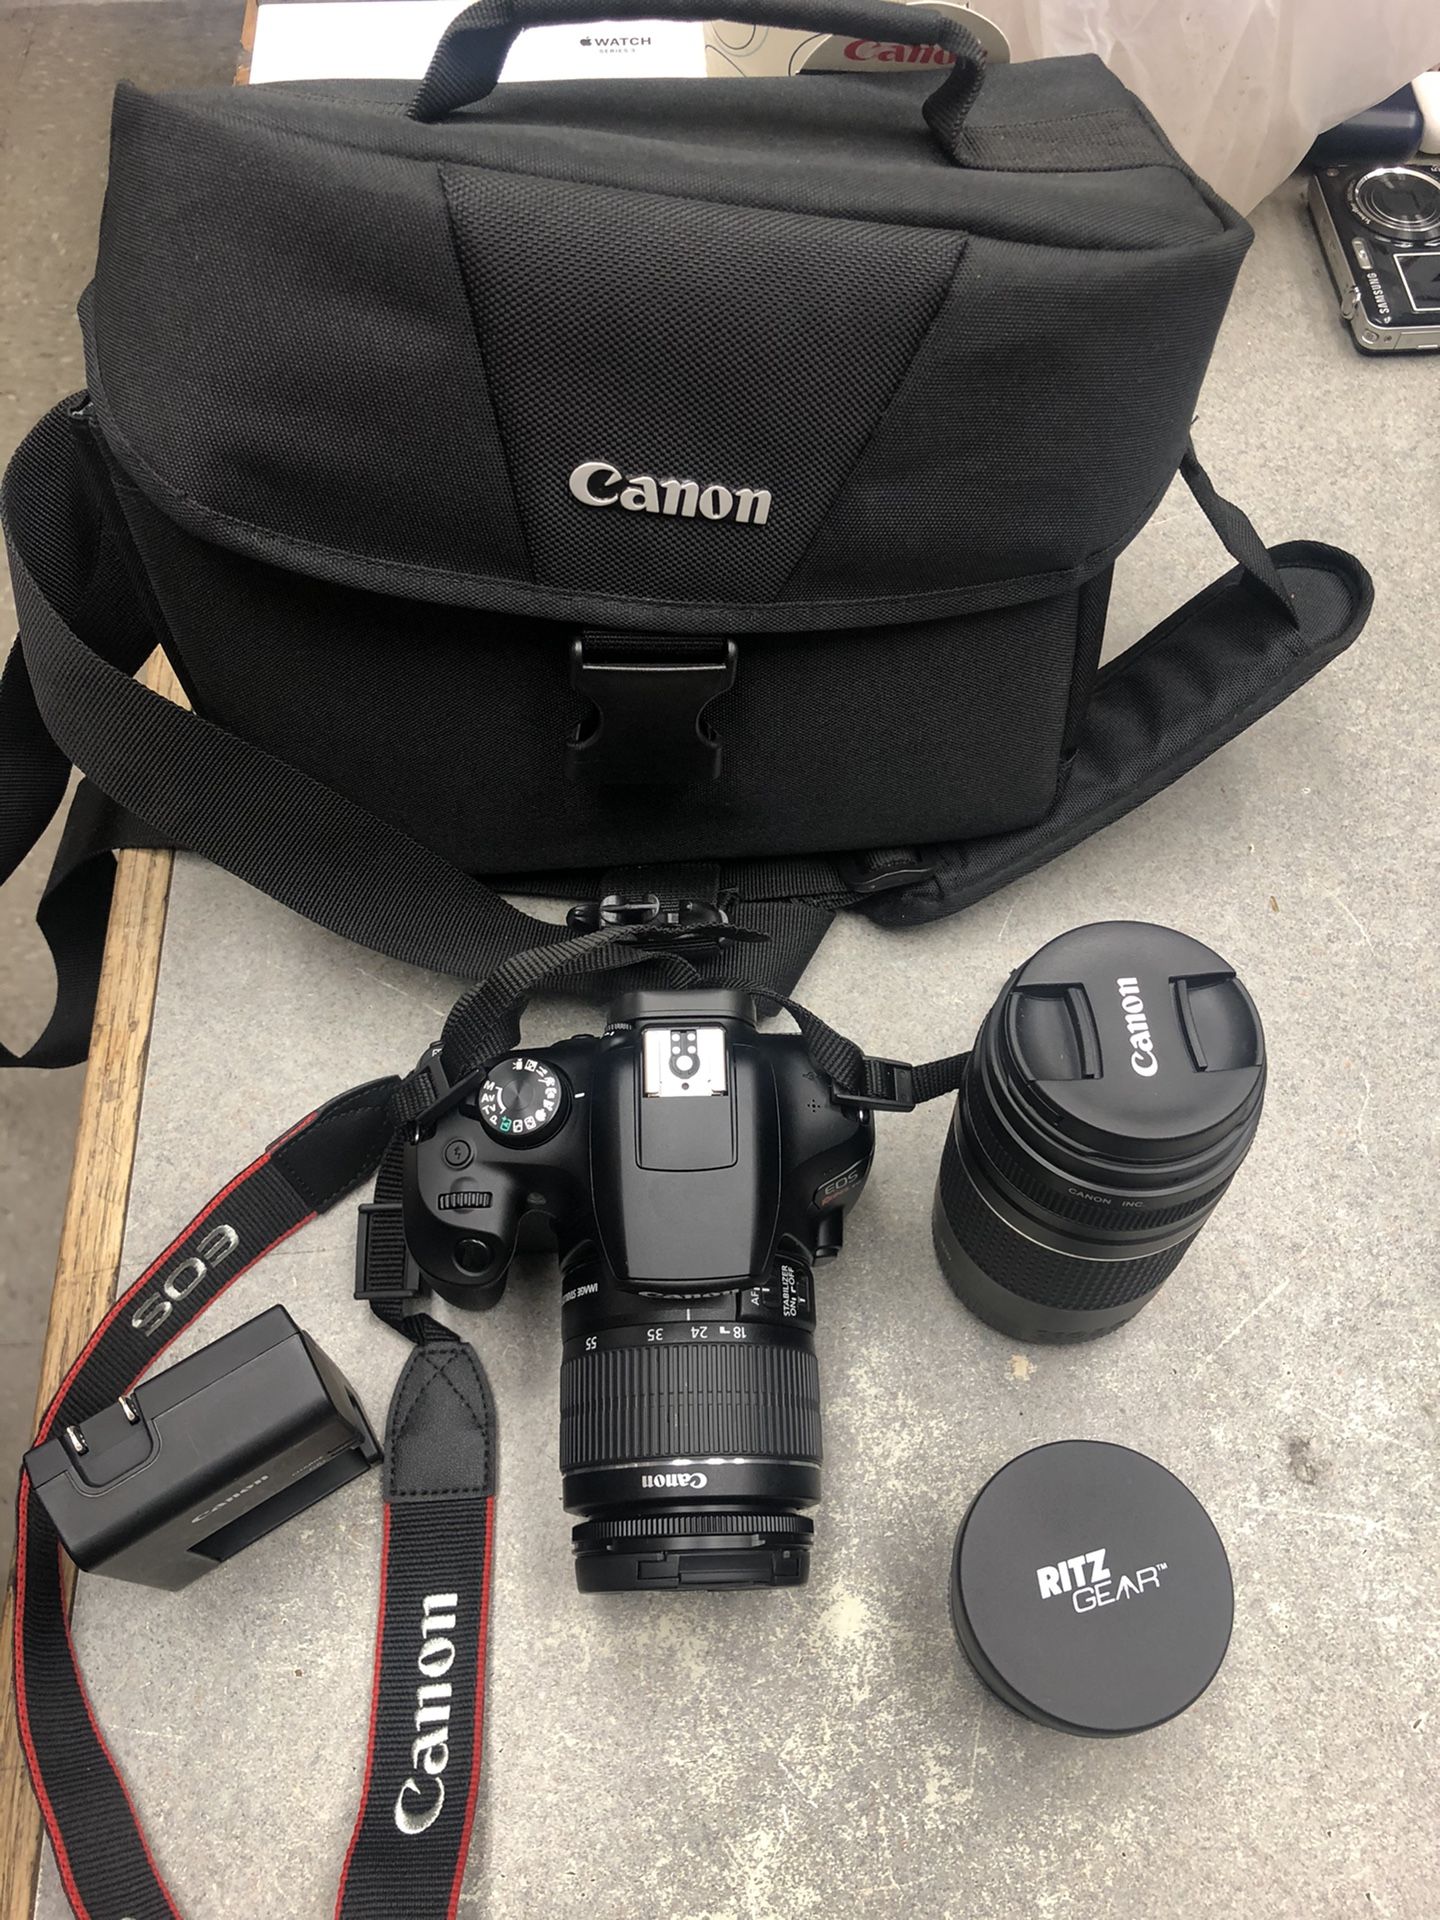 Canon rebel t6 with bag, charger, and 2 lenses